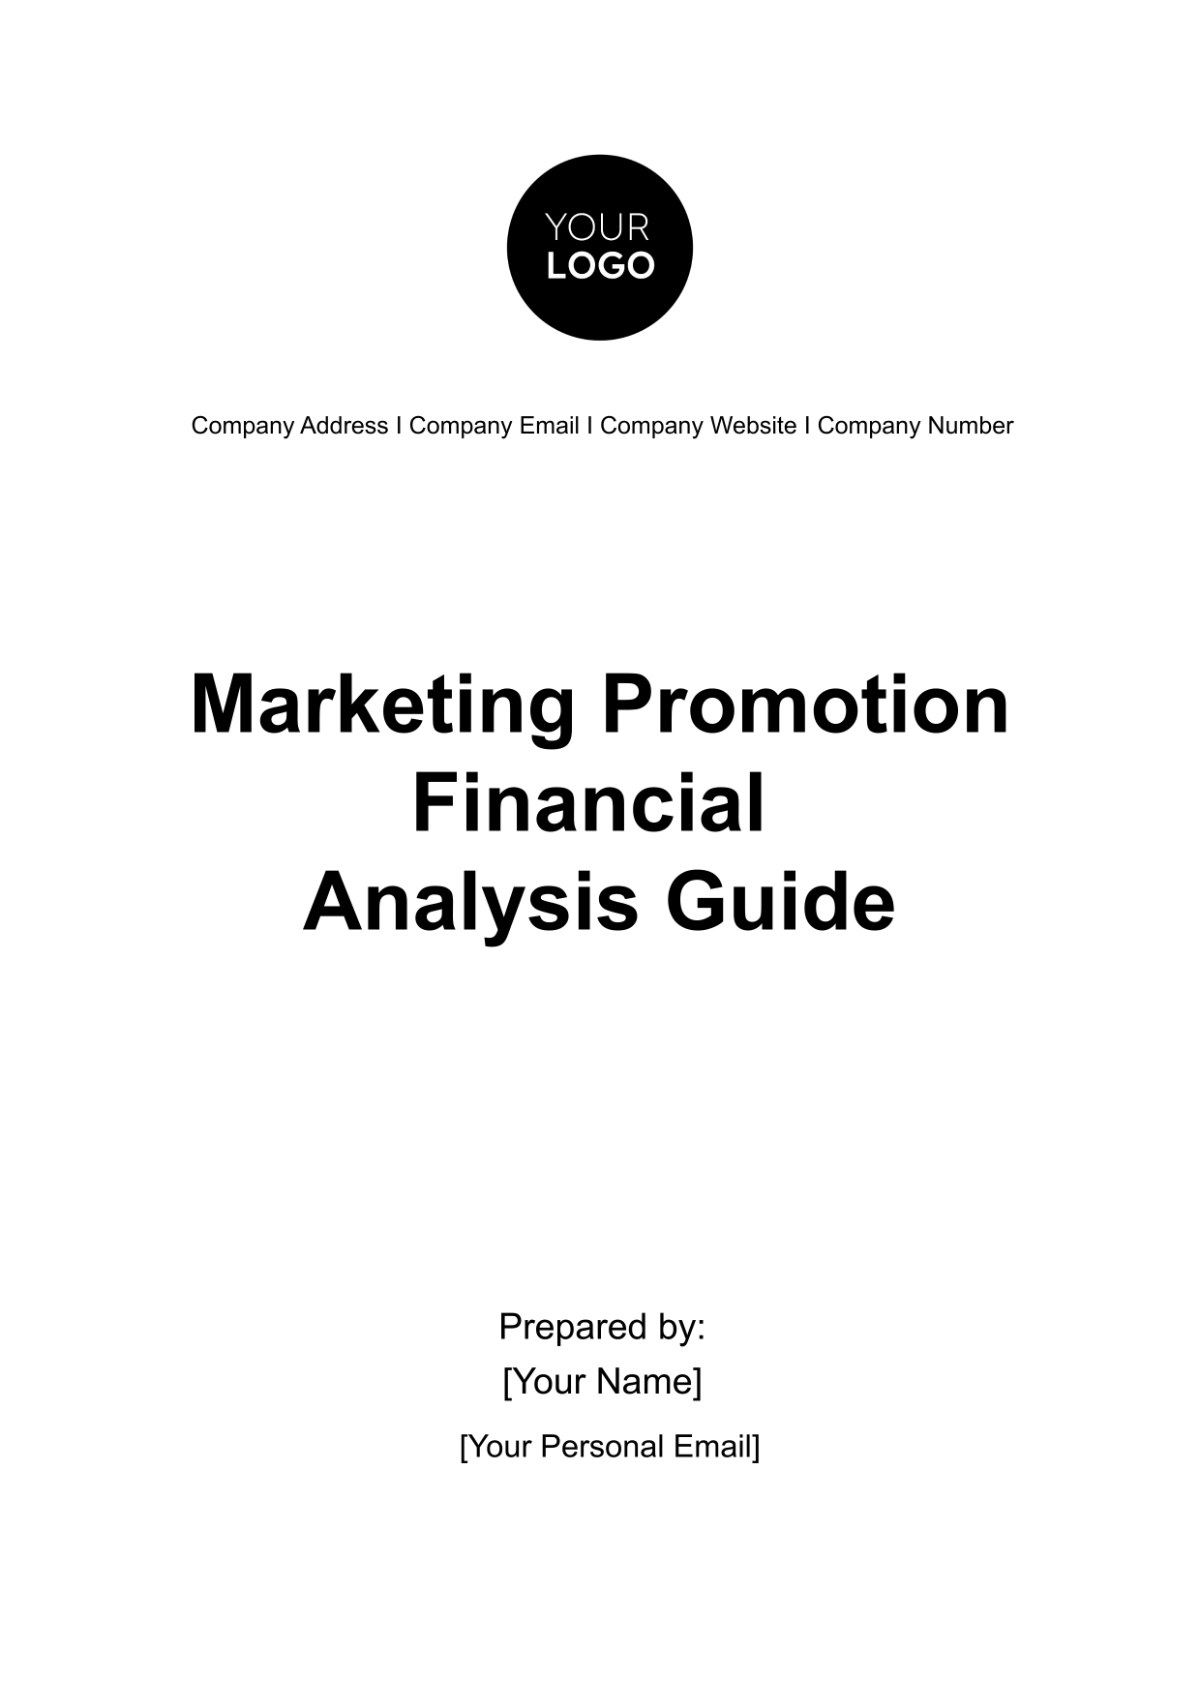 Marketing Promotion Financial Analysis Guide Template